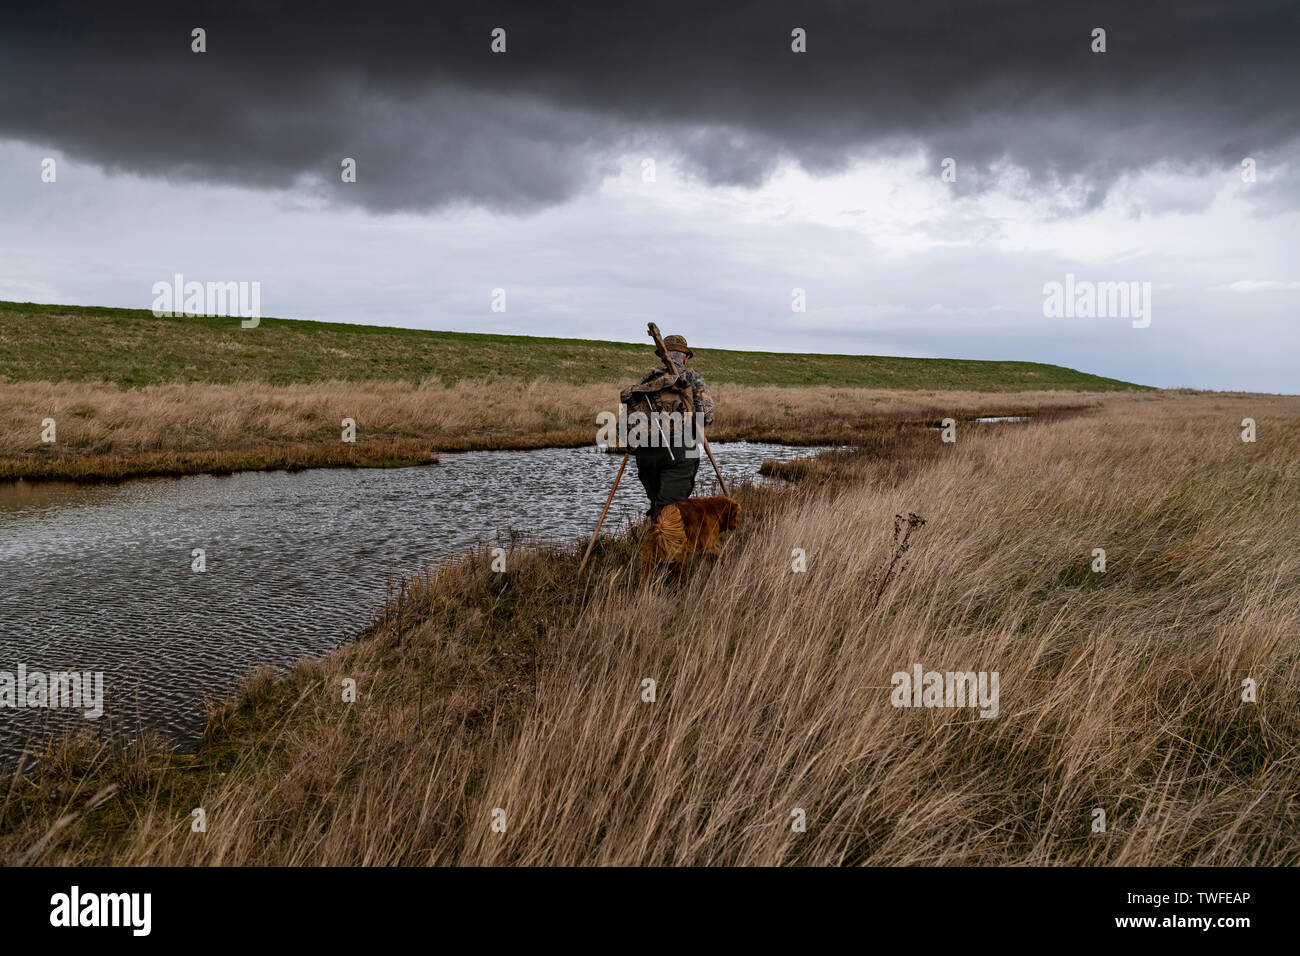 Wildfowling on the Lincolnshire Wash with shooter and gundog walking through the marshes with storm clouds and rain. Stock Photo